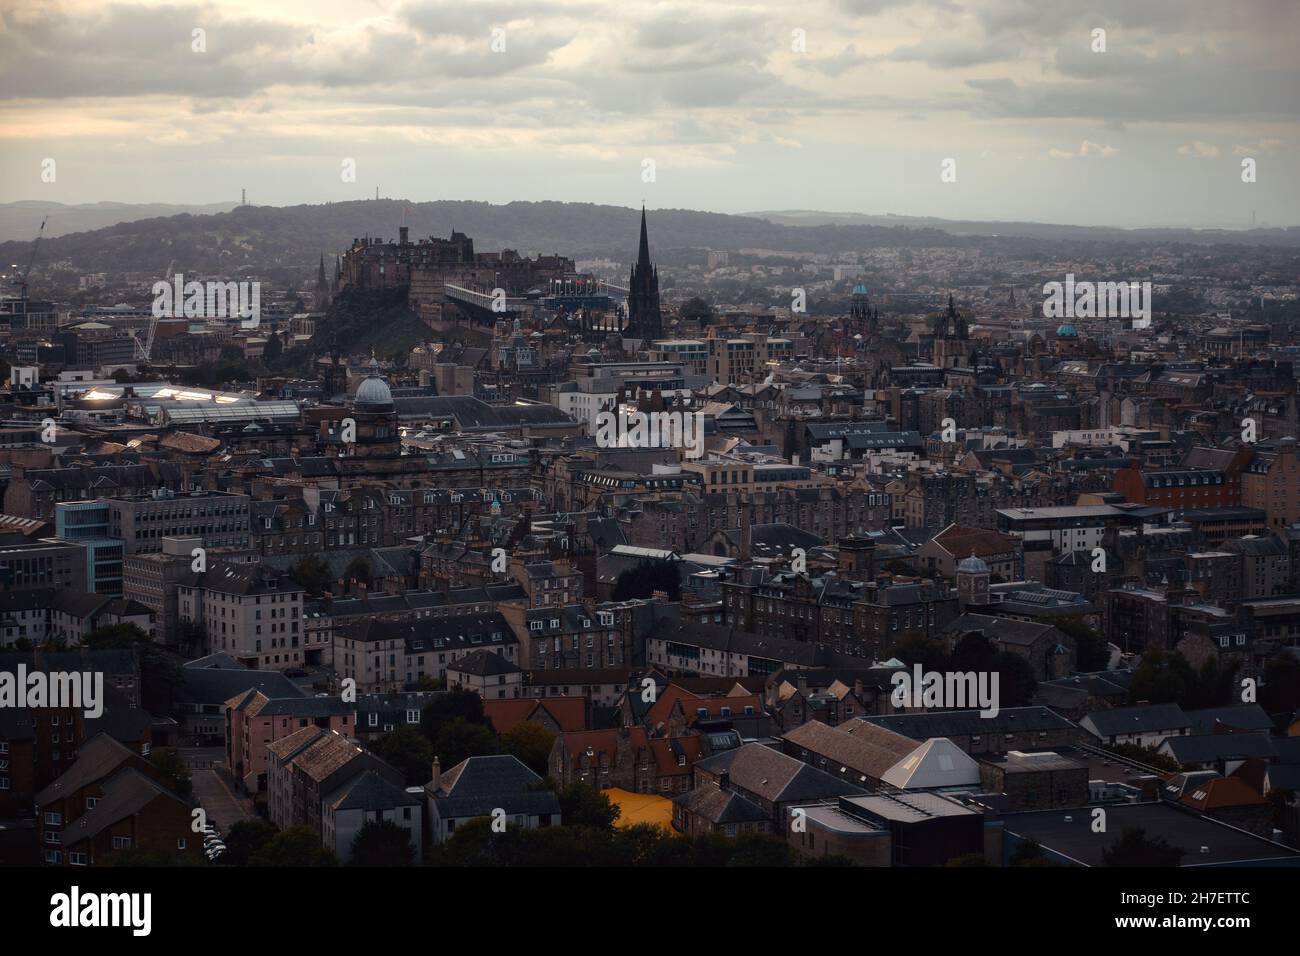 Top view of Edinburgh covered clouds and the Castle, Edinburgh, Scontald, United Kingdom Stock Photo